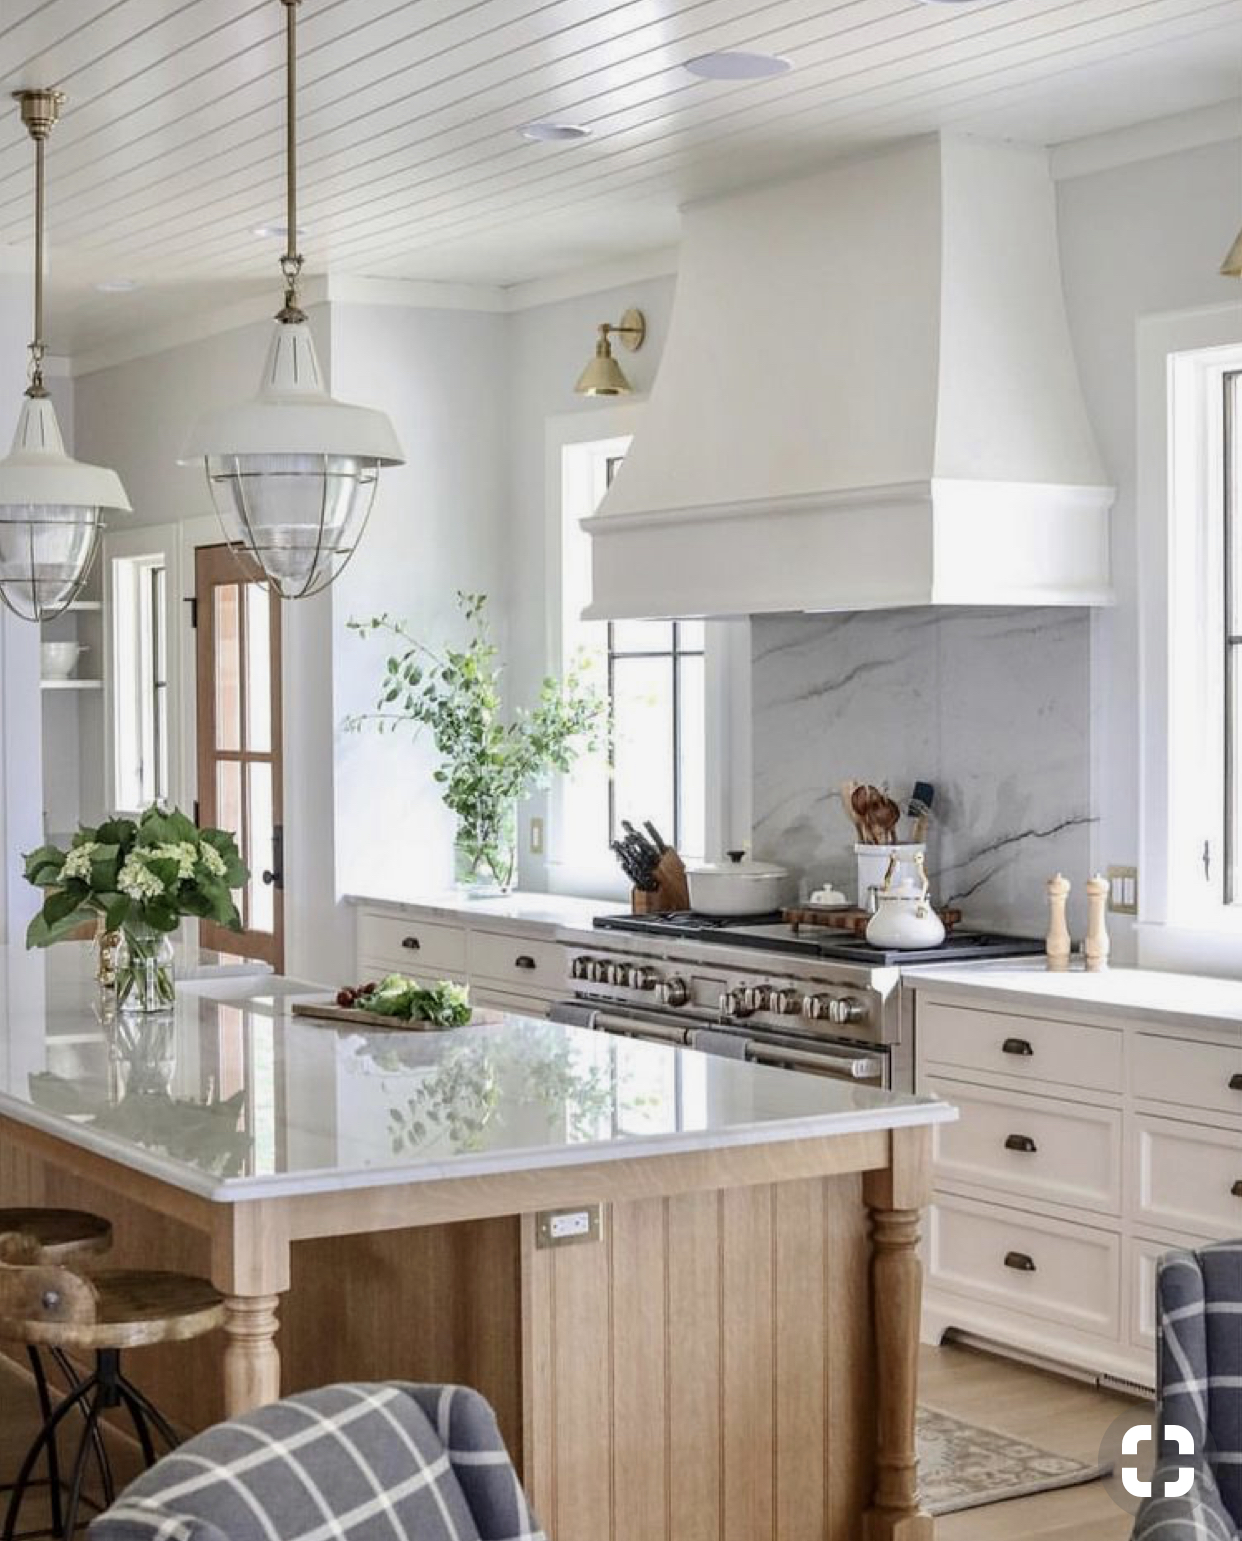 *Kitchen Inspiration: Love the wood stained island that adds warmth to the white kitchen